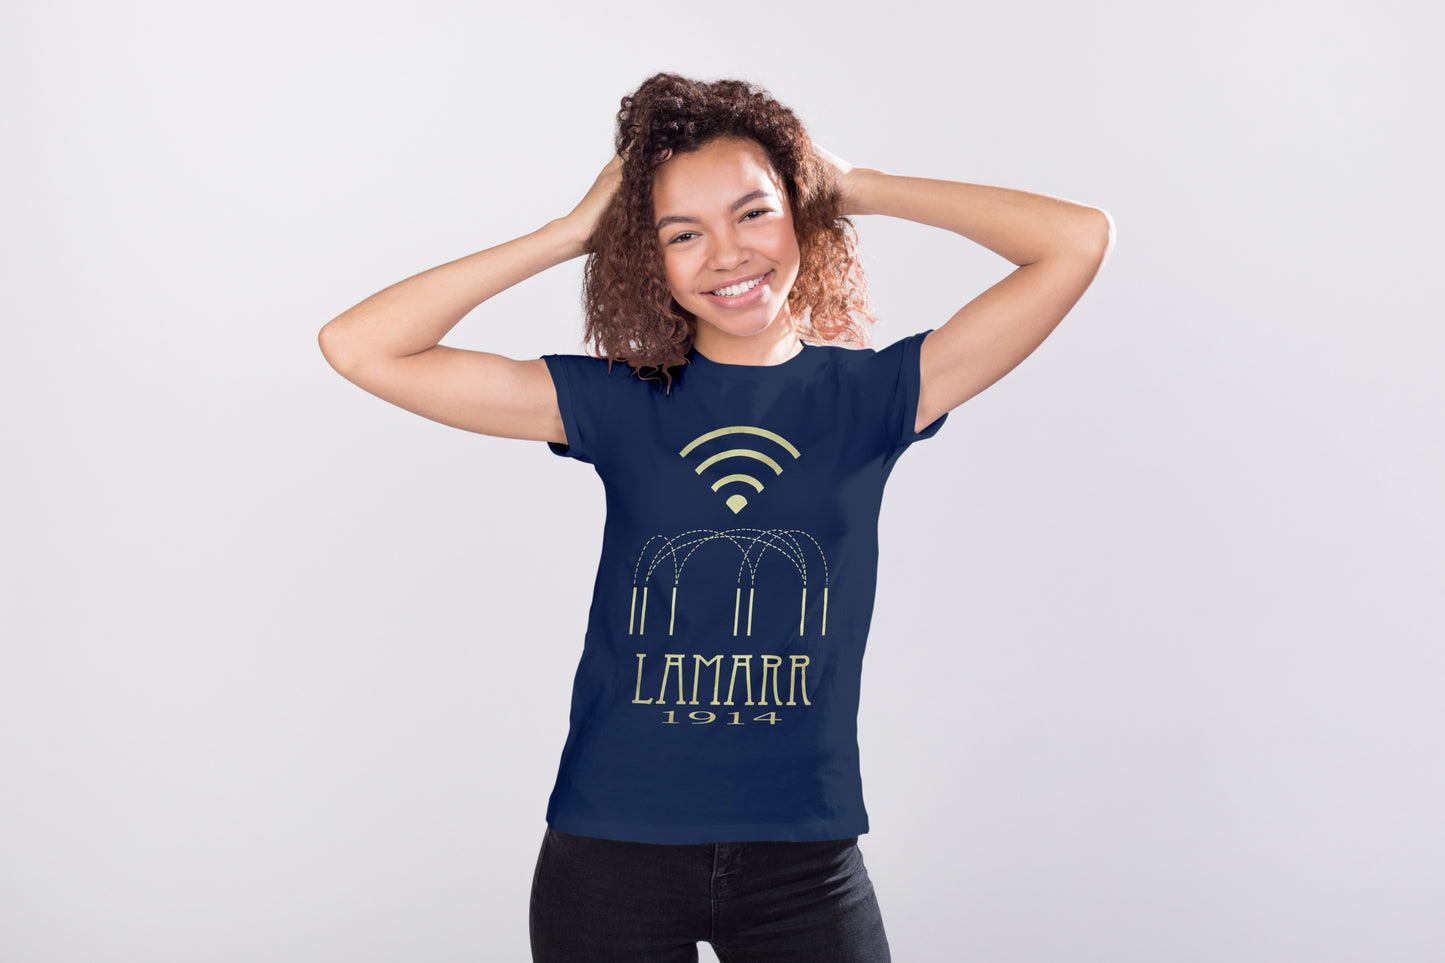 Lamarr WiFi Inventor T-shirt, Hedy Lamarr Science Tech Graphic Tee